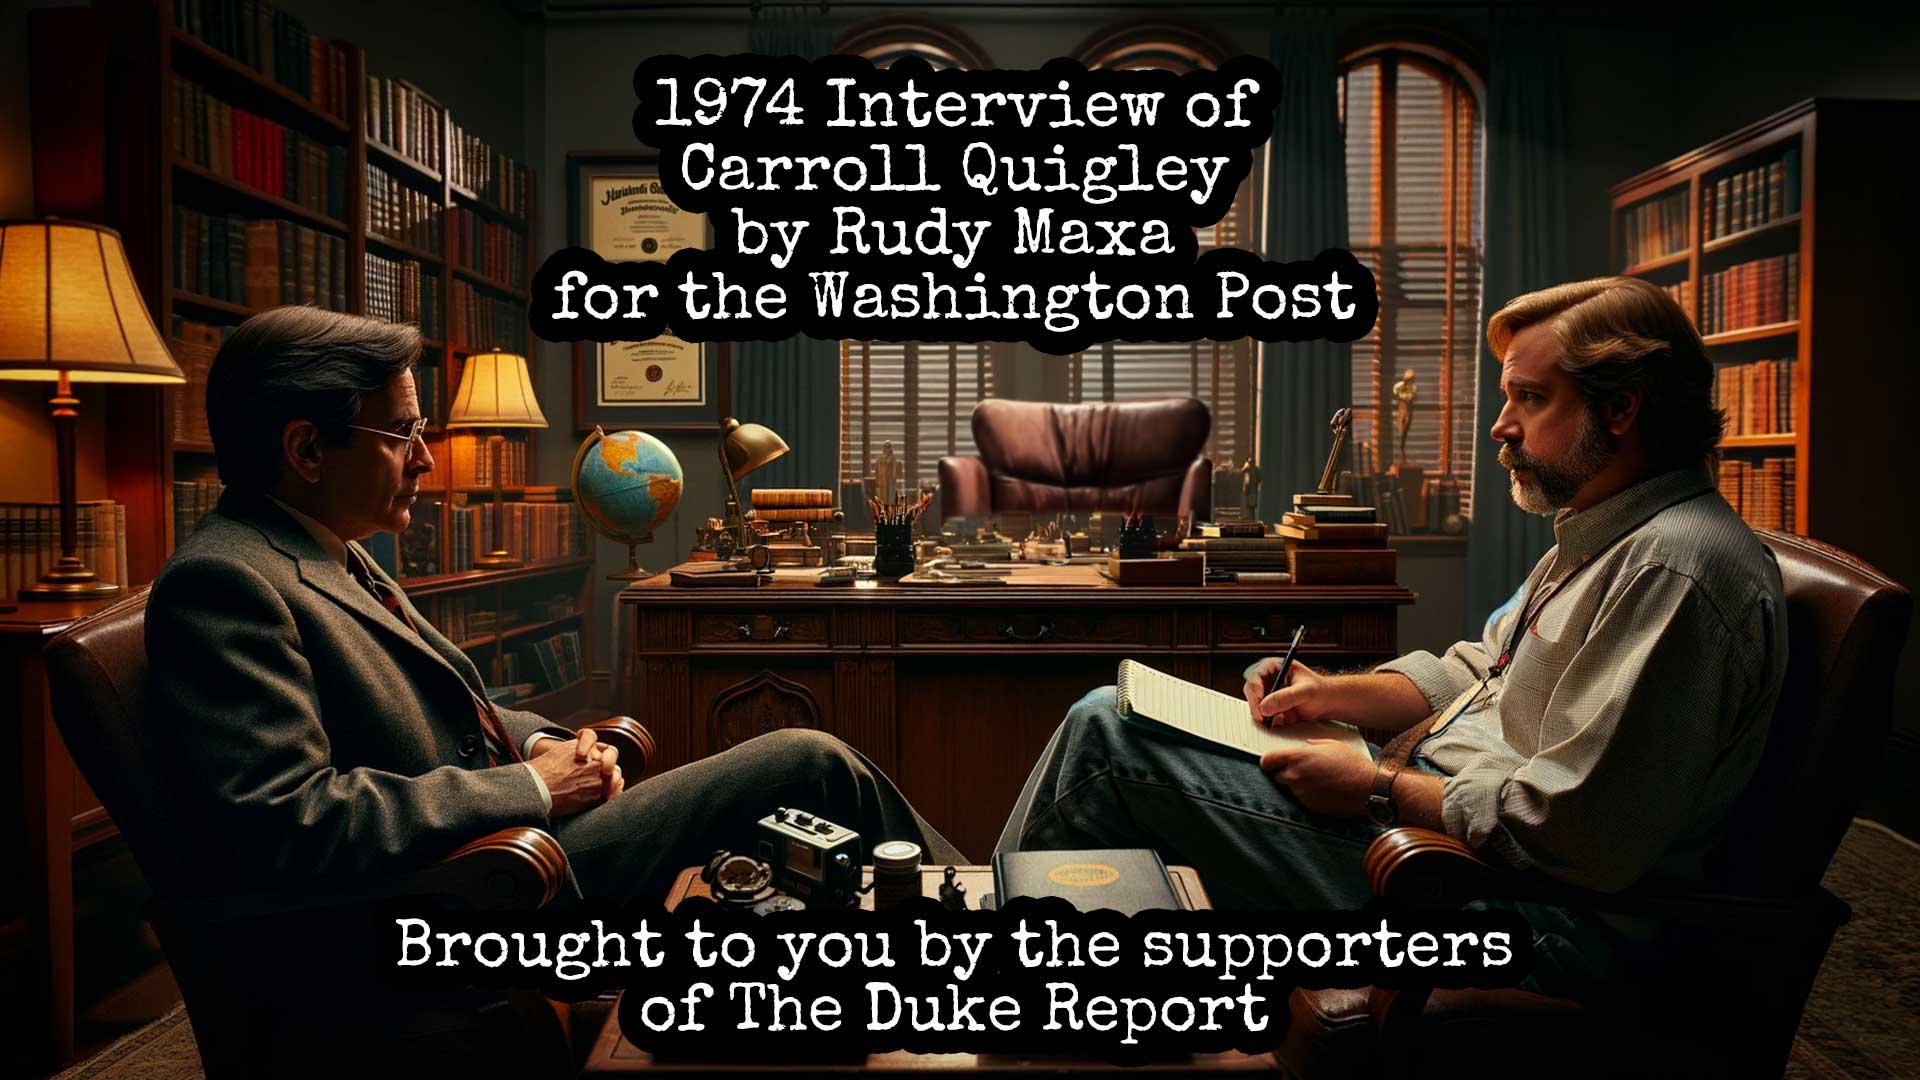 1974 Interview of Carroll Quigley by Rudy Maxa for the Washington Post